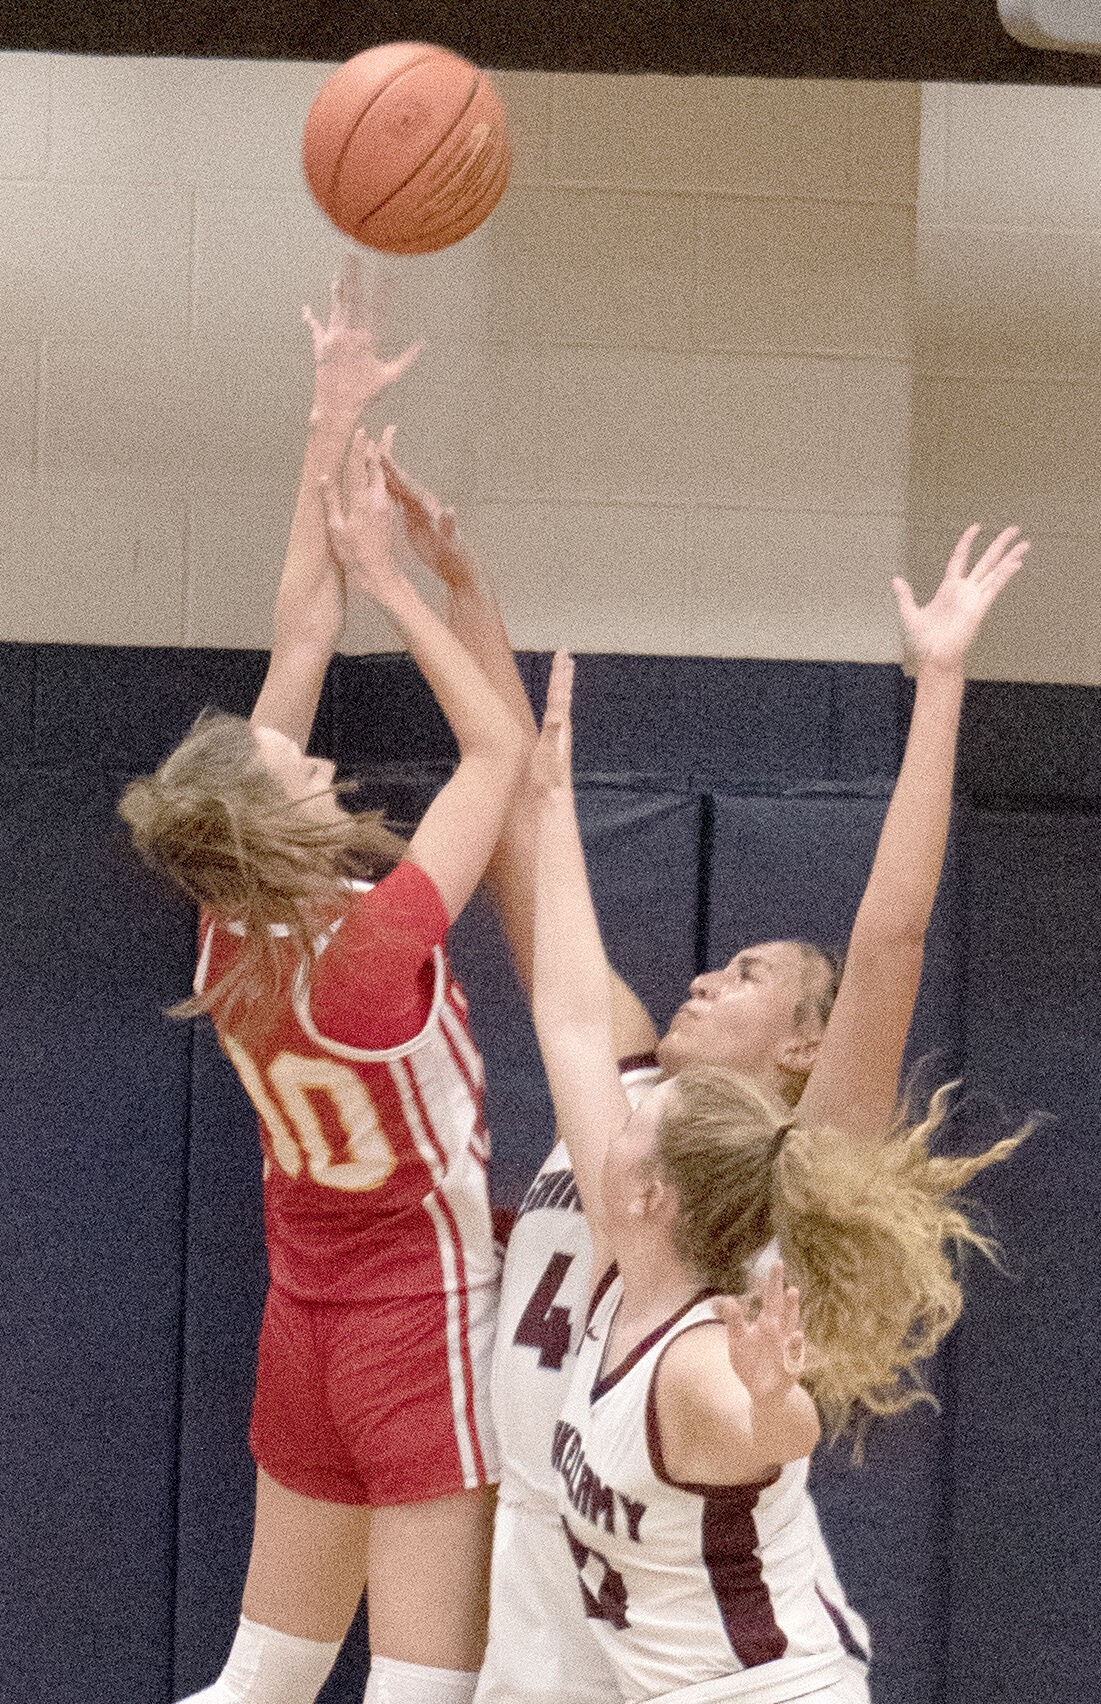 Shikellamy Girls Basketball Team Secures Dominant 56-27 Win with Standout Performances